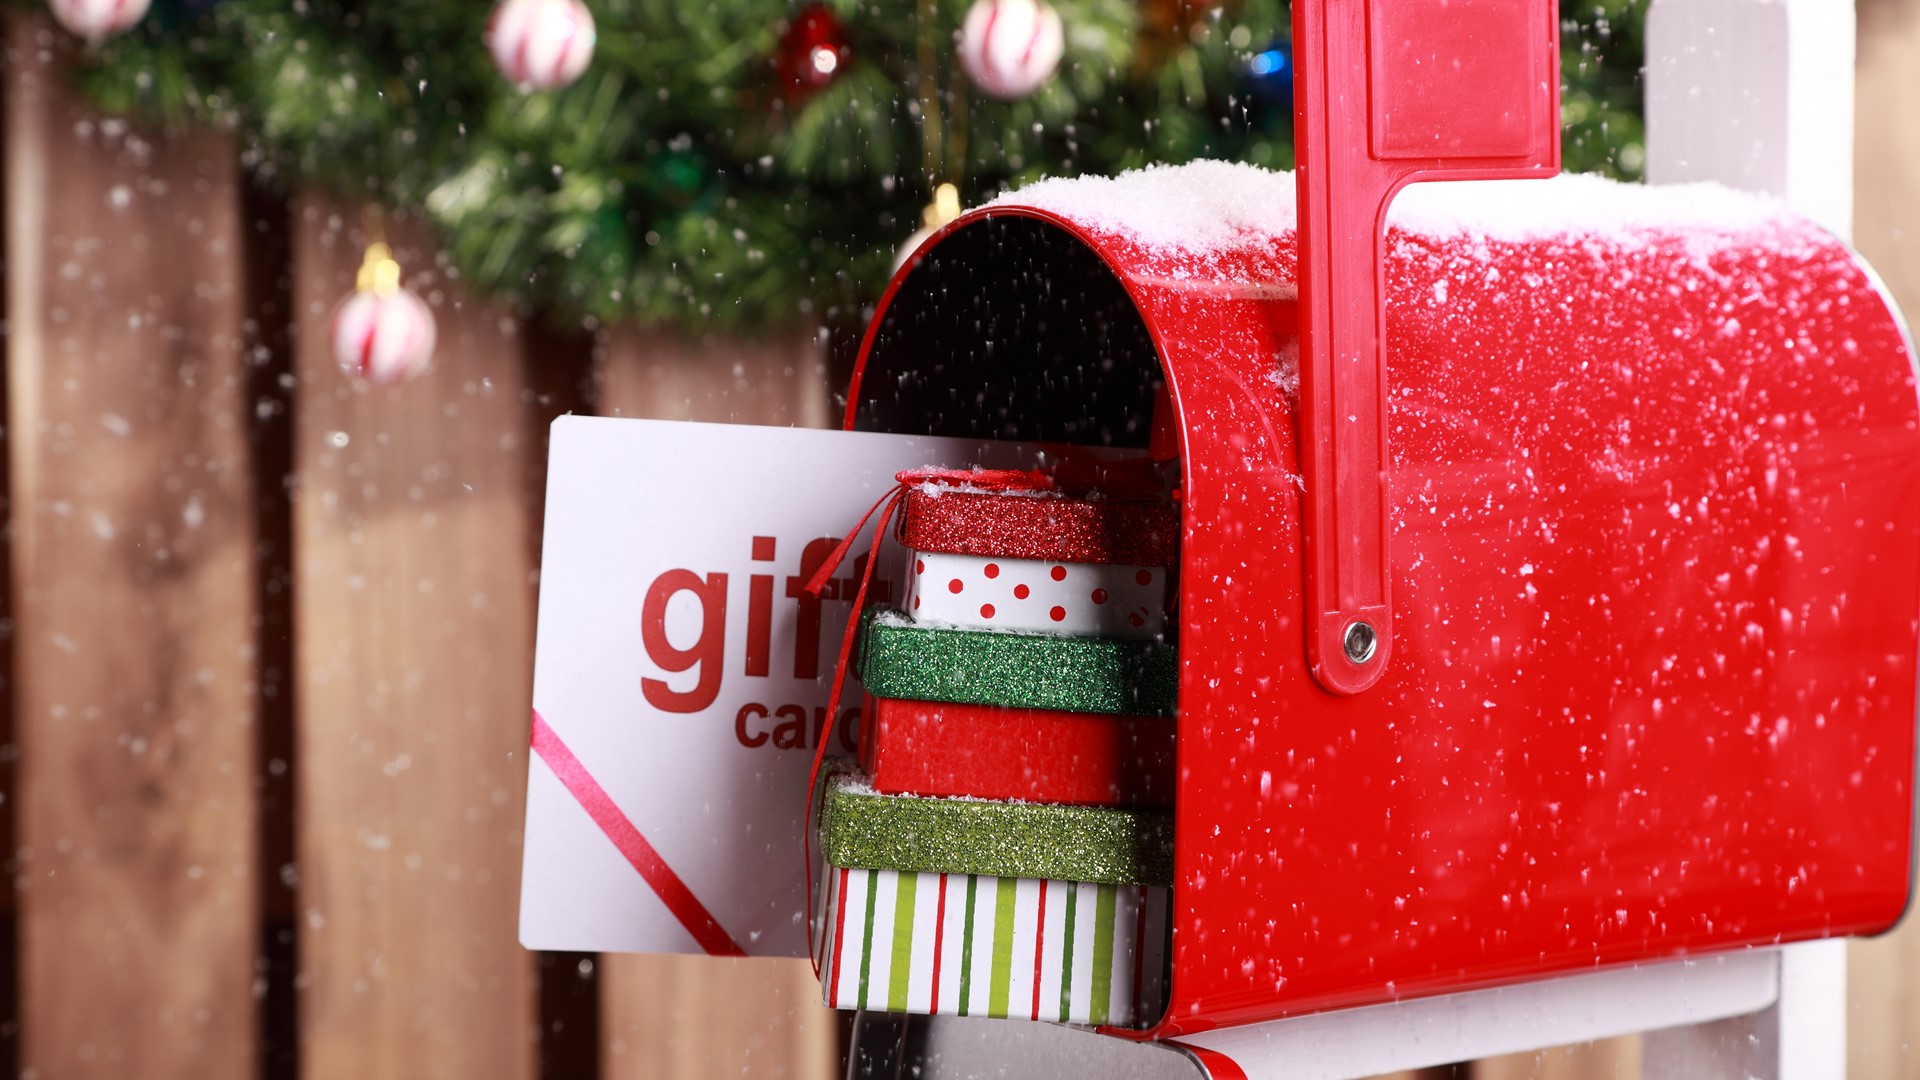 The deadline to get gifts under the tree is quickly approaching. If you're still shopping, you may need to explore some alternative delivery options.